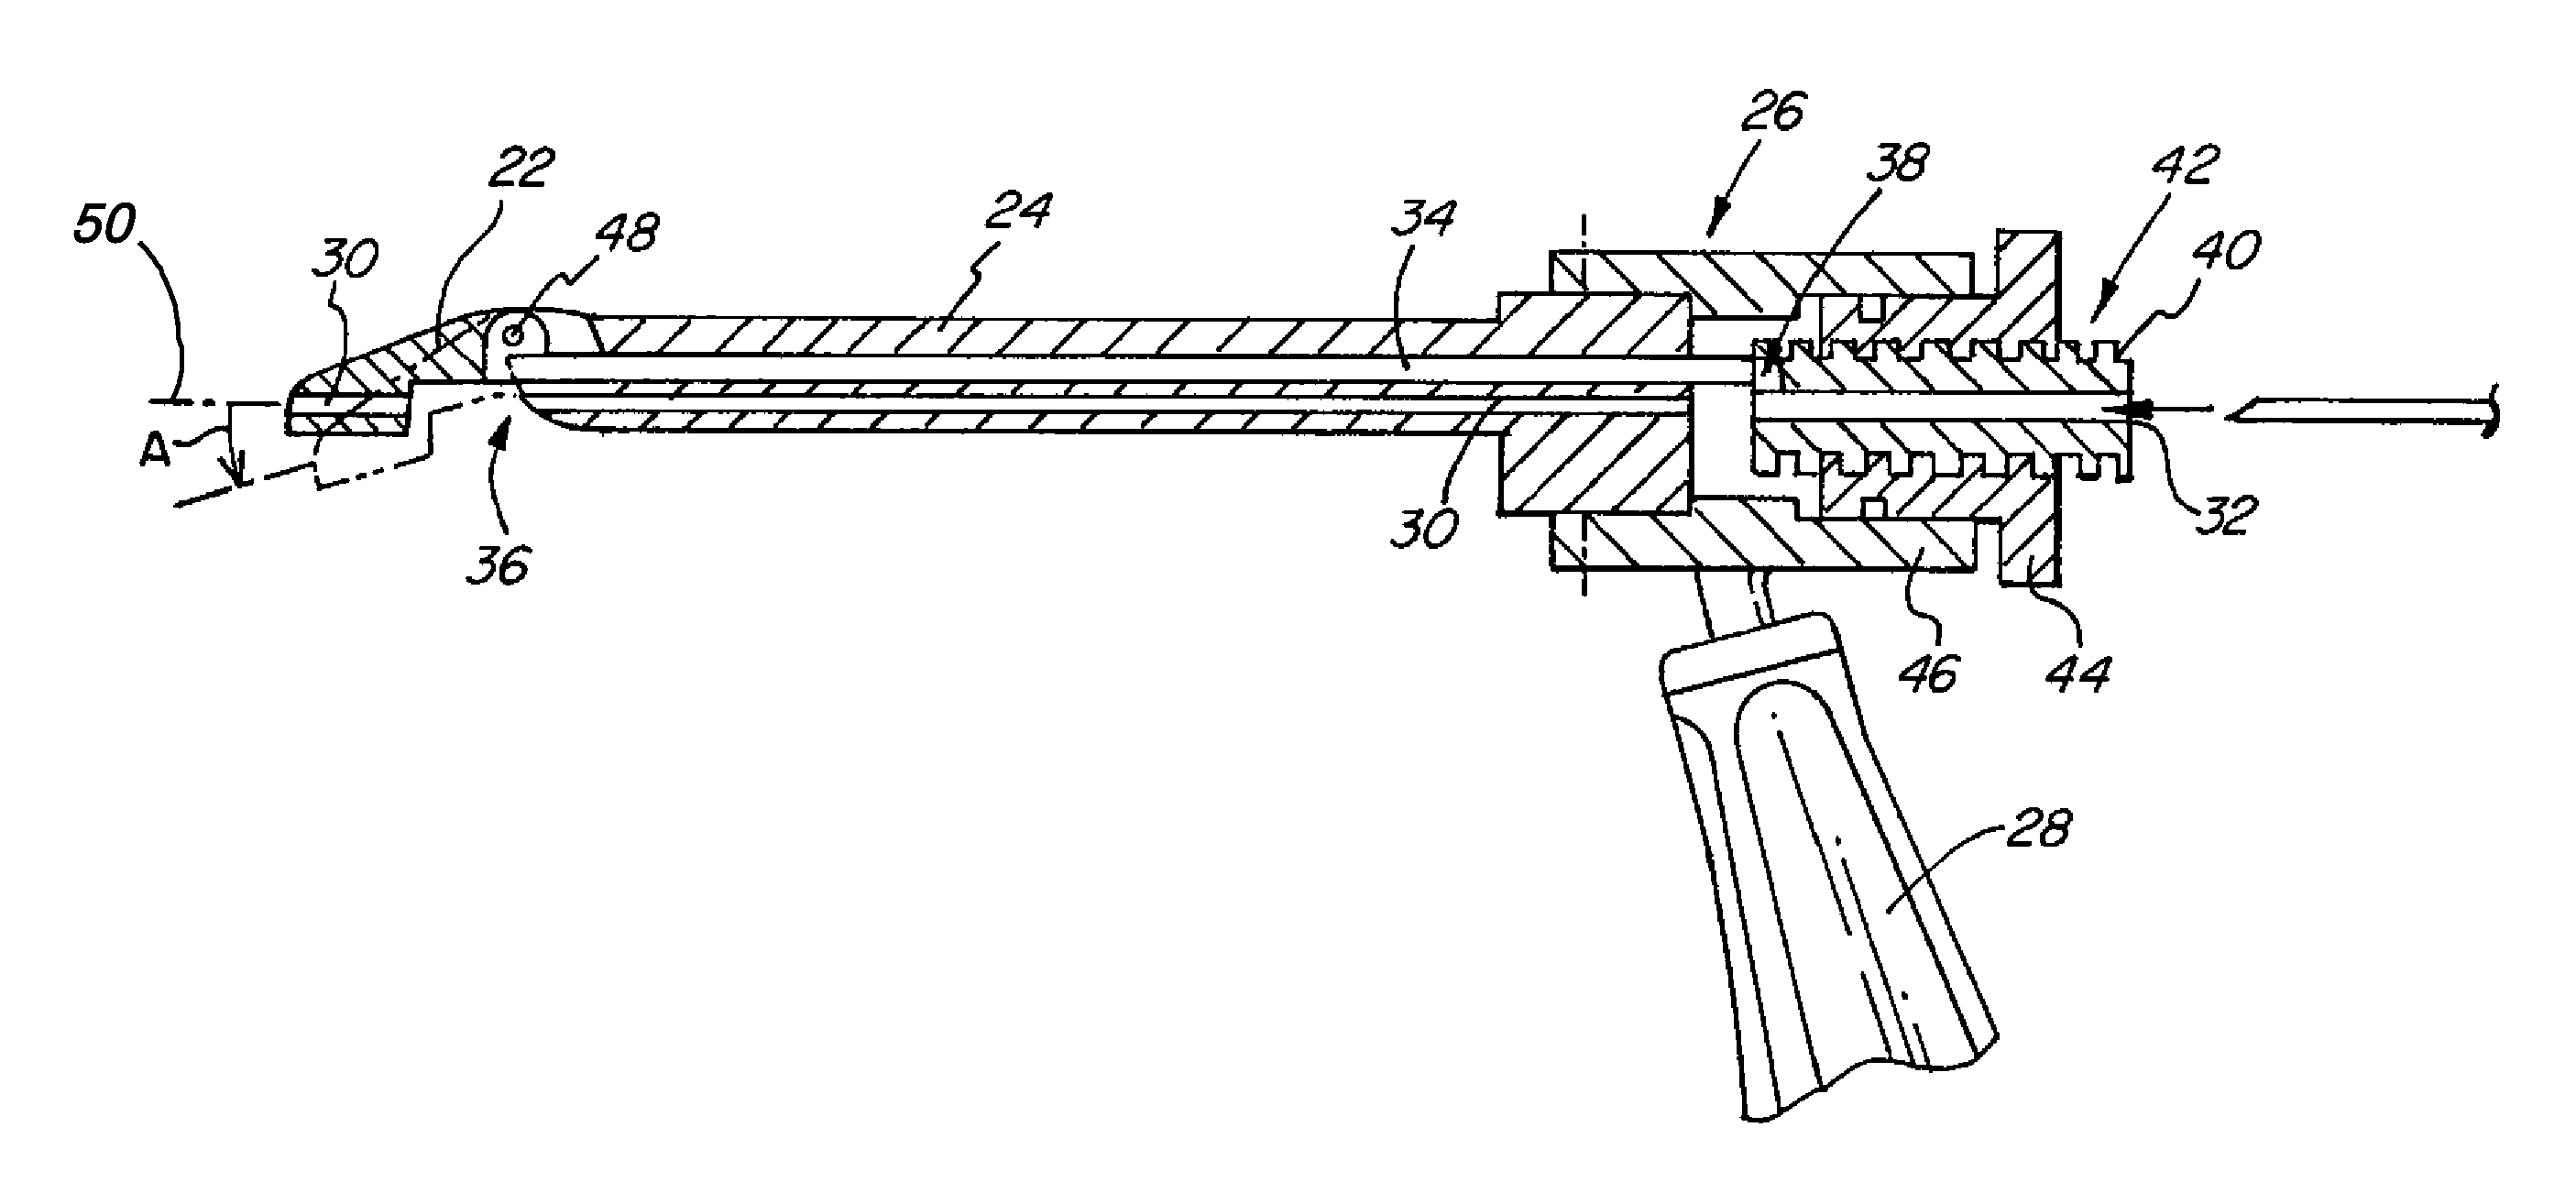 Surgical drill for providing holes at an angle